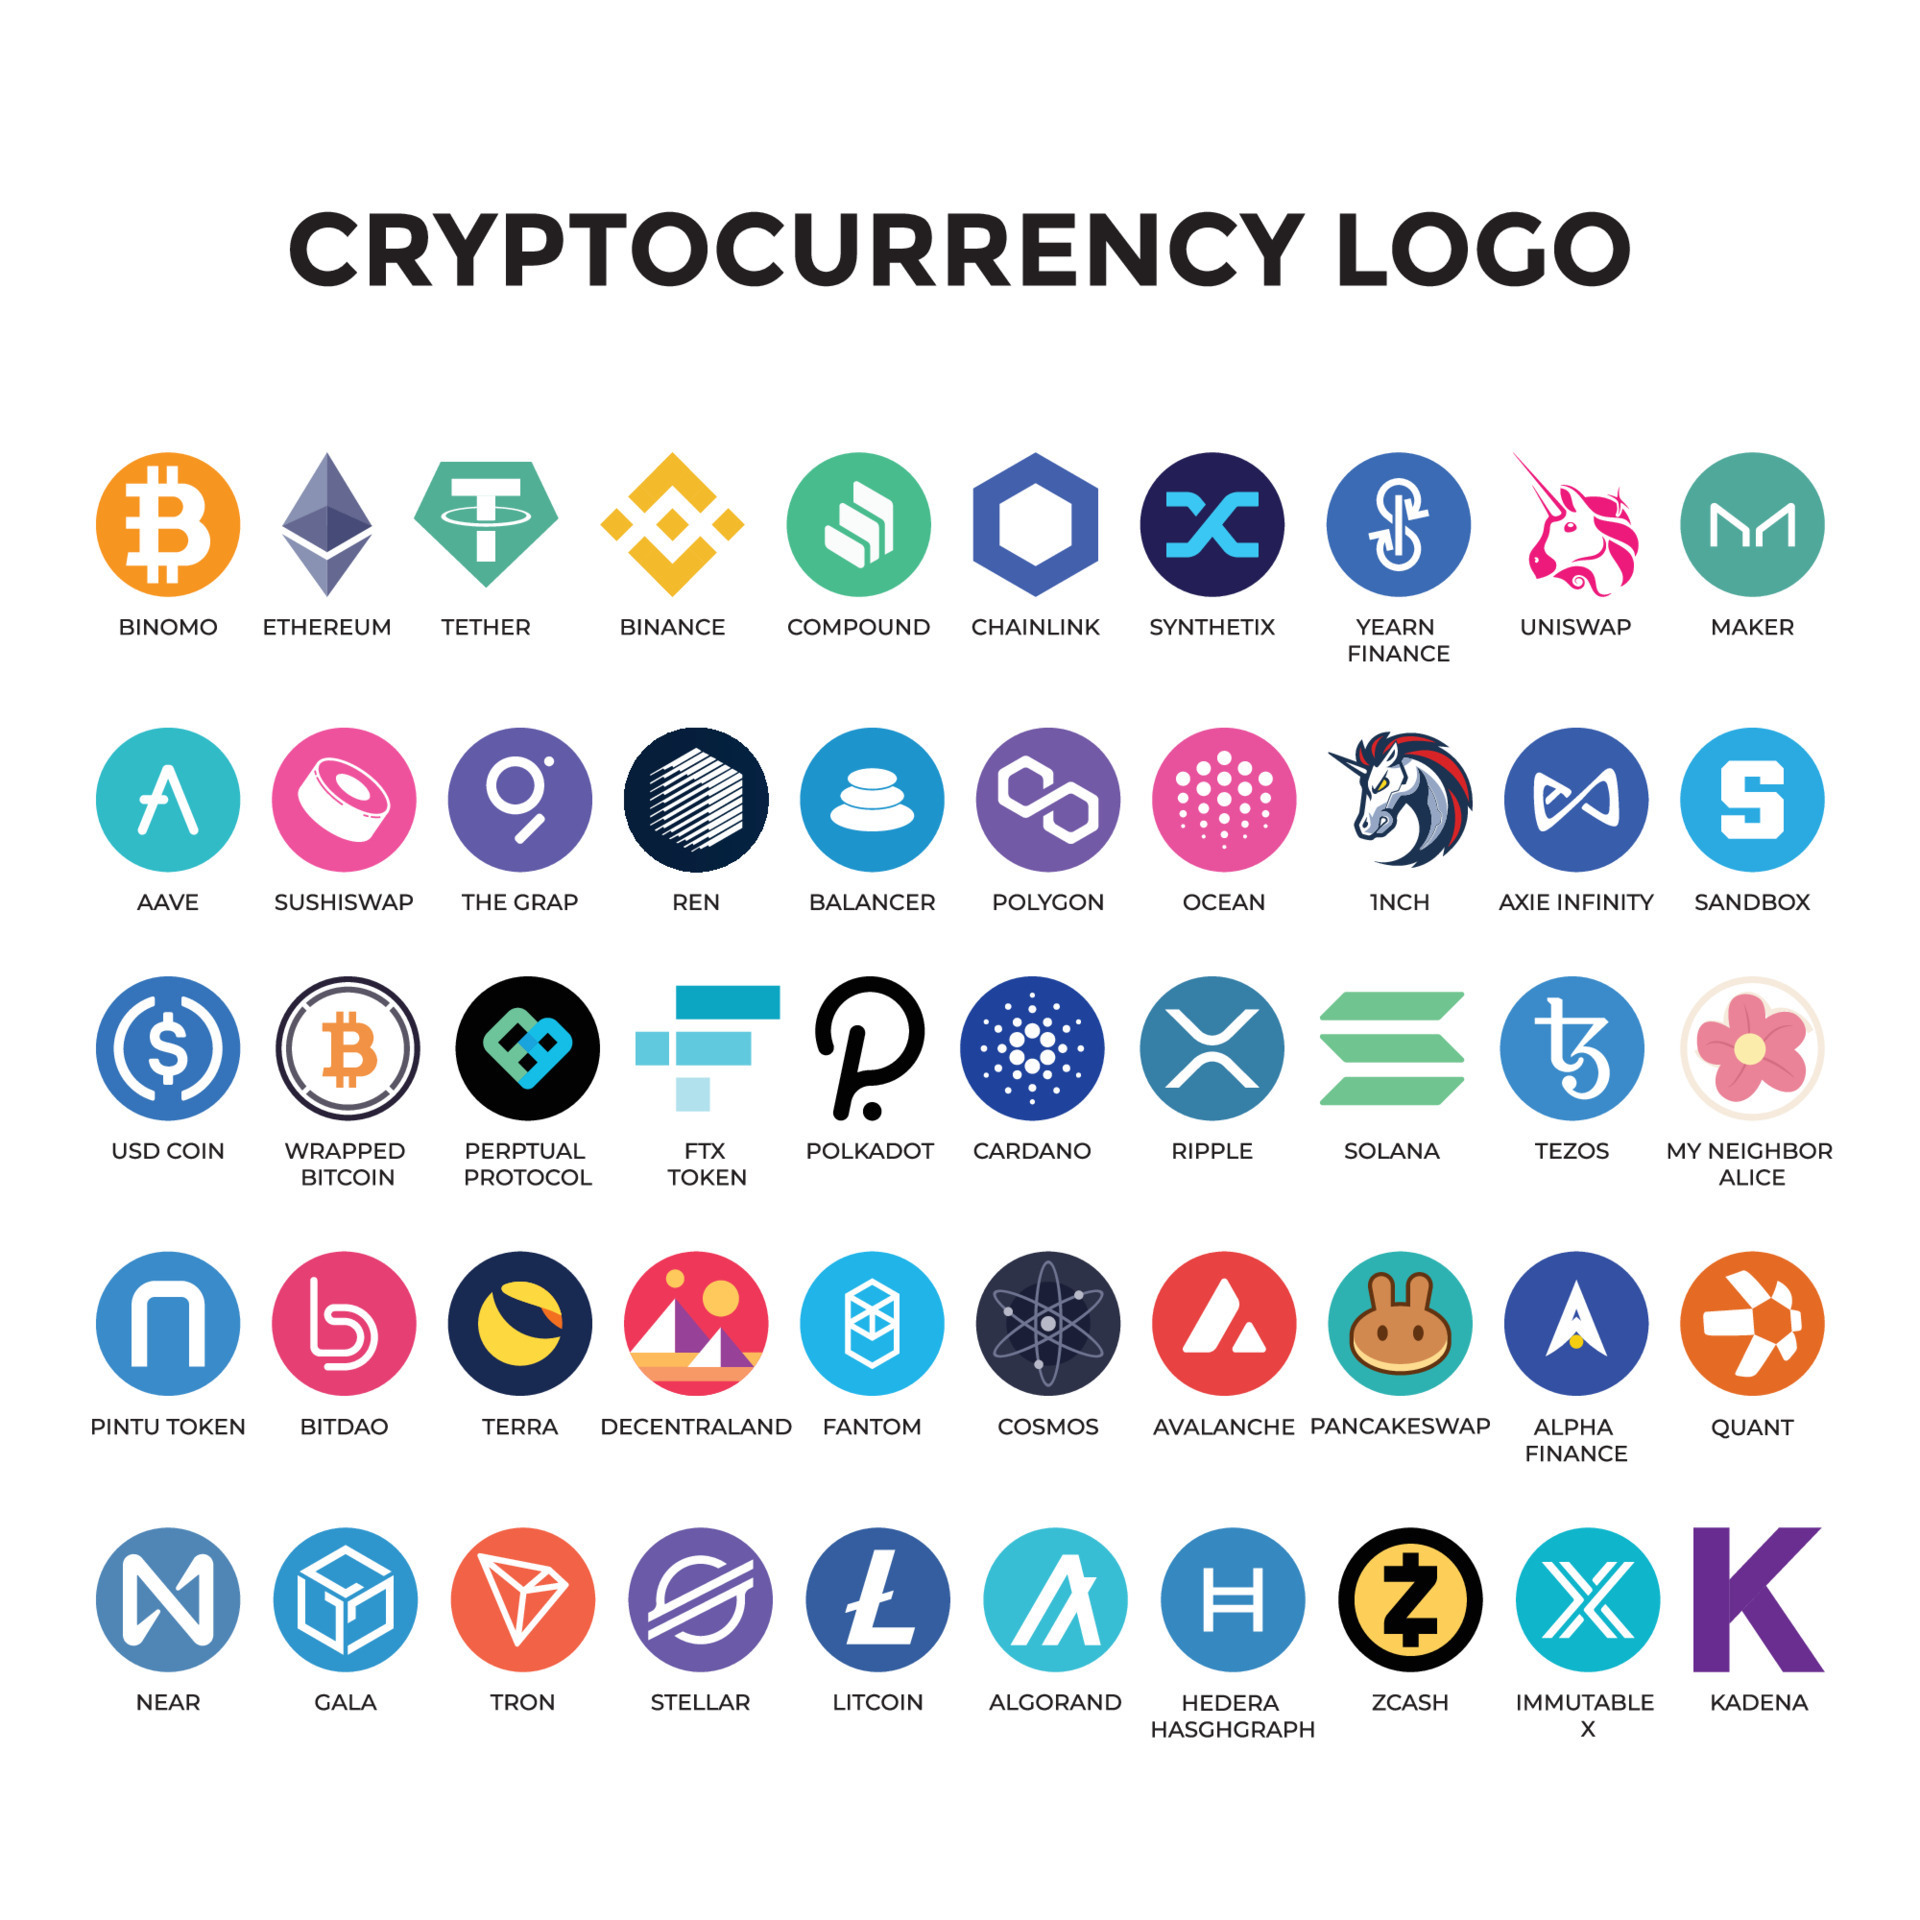 Crypto Logos - Download the Cryptocurrency Icons in PNG/SVG - Coinpaper